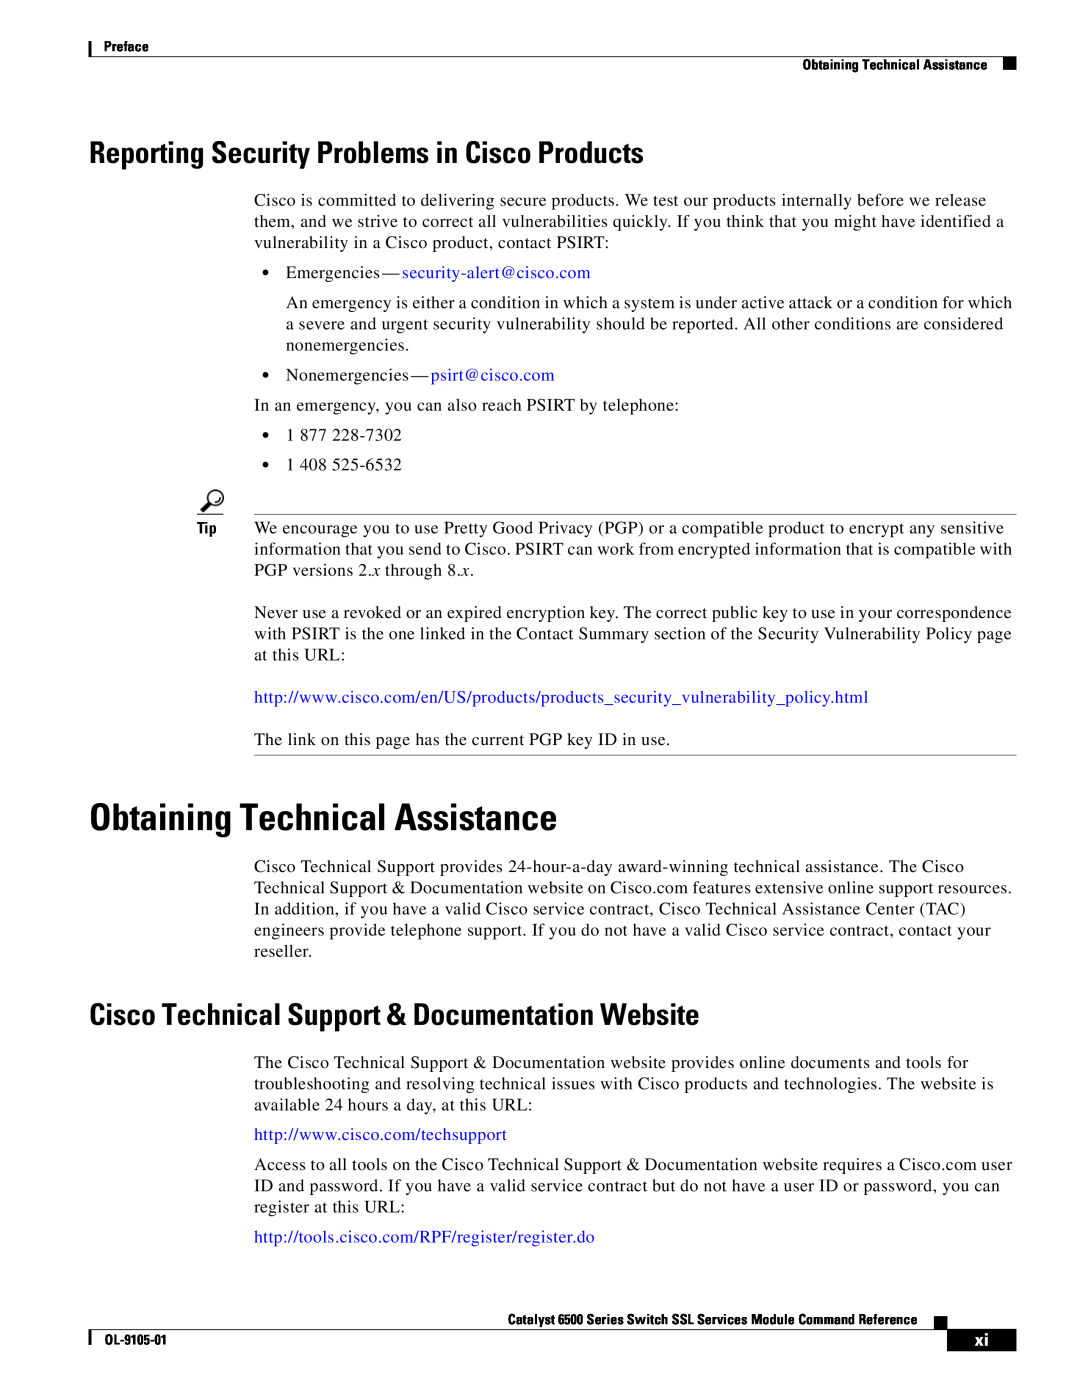 Cisco Systems 6500 manual Obtaining Technical Assistance, Reporting Security Problems in Cisco Products 